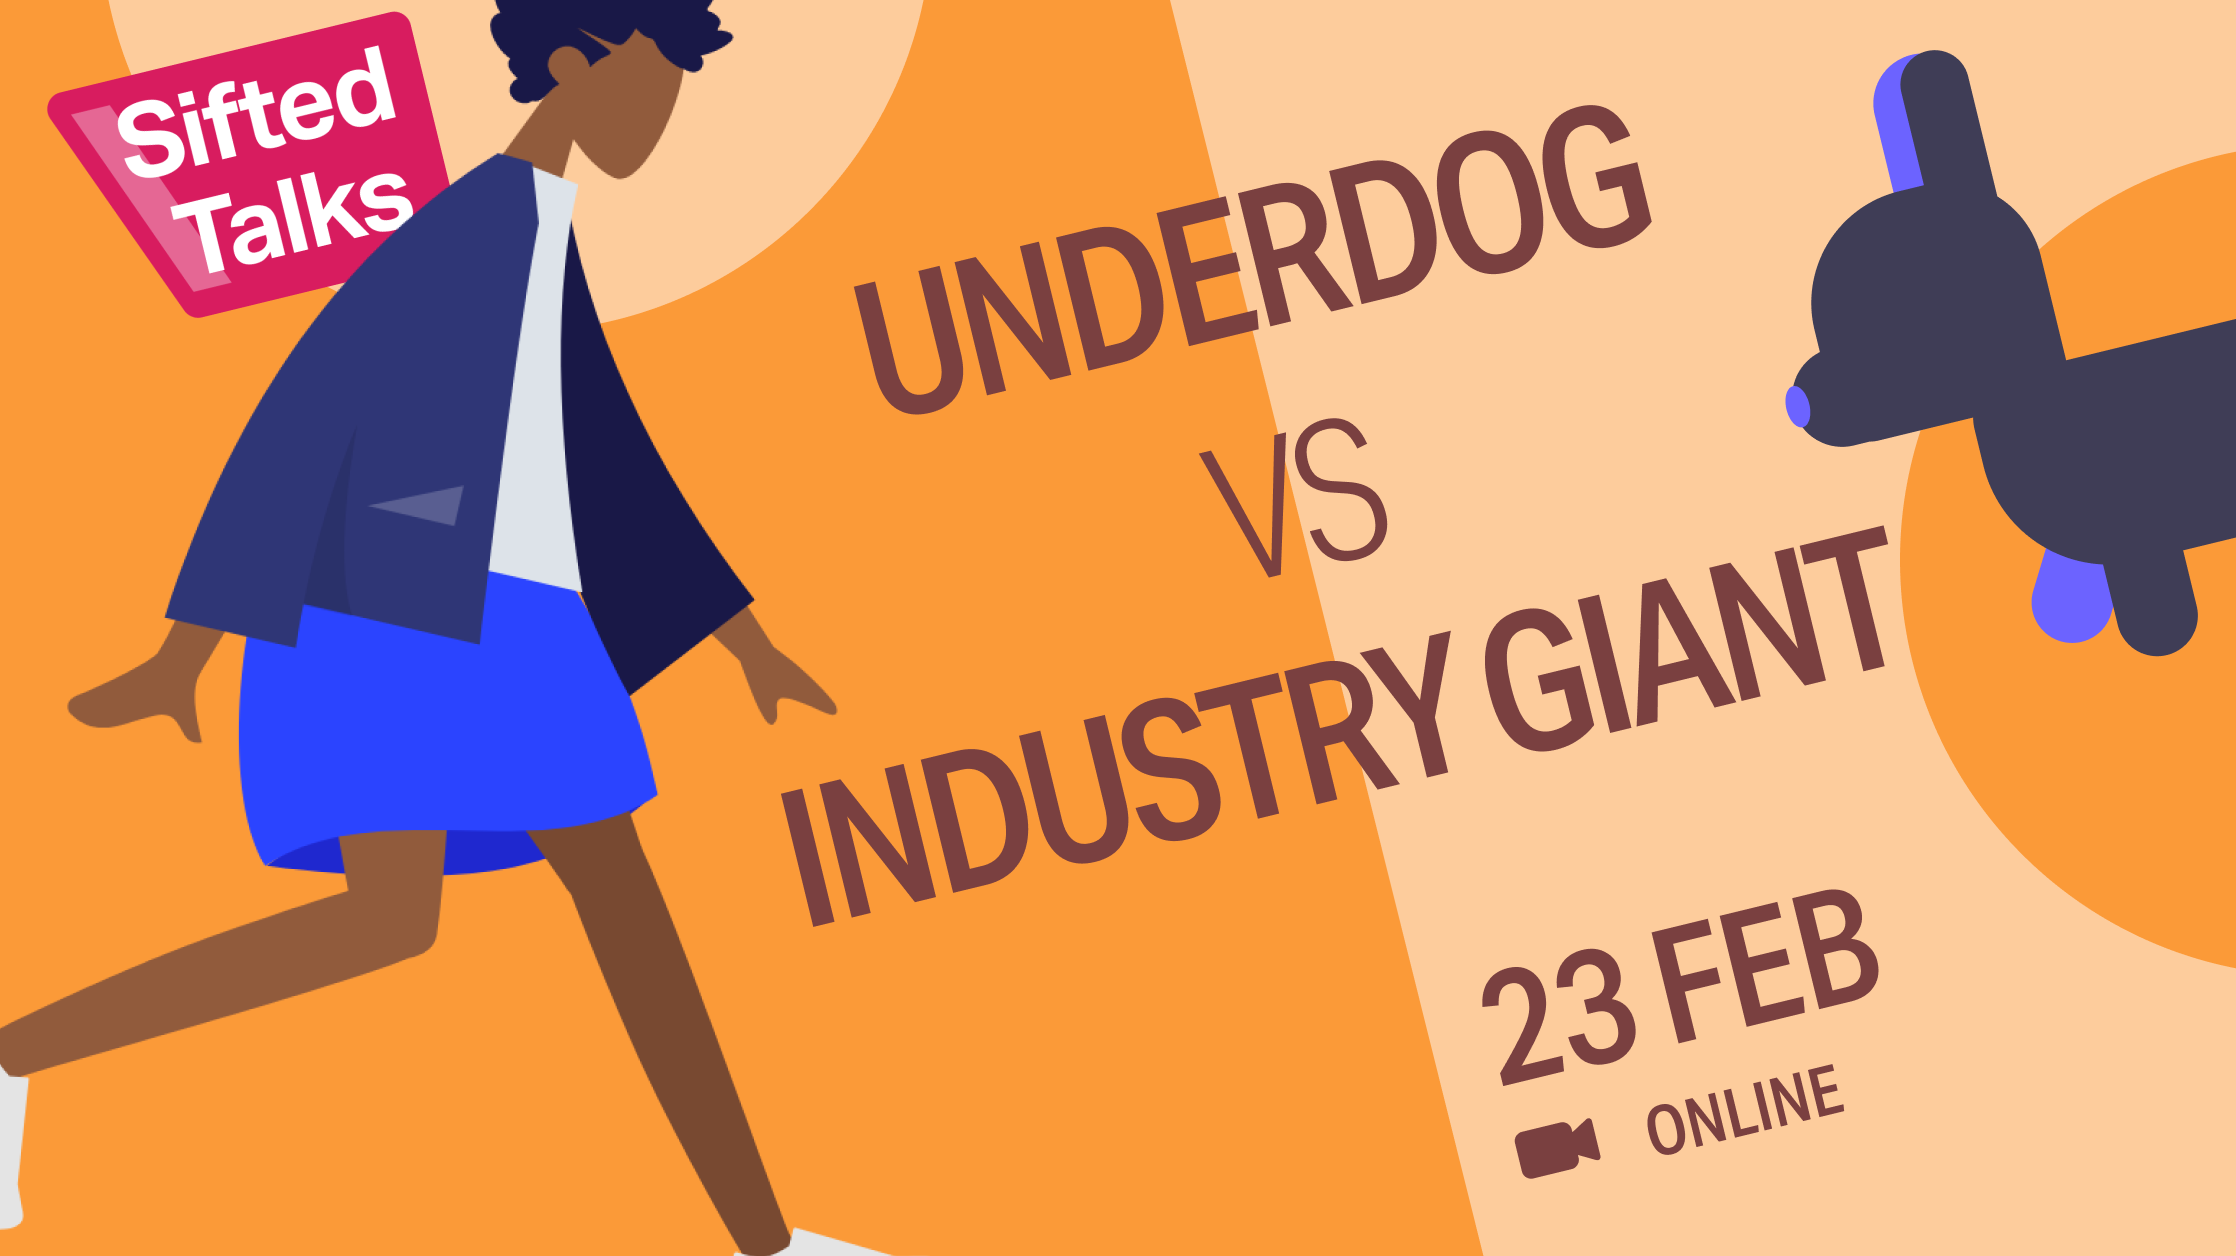 The underdog survival guide: How to compete with industry giants